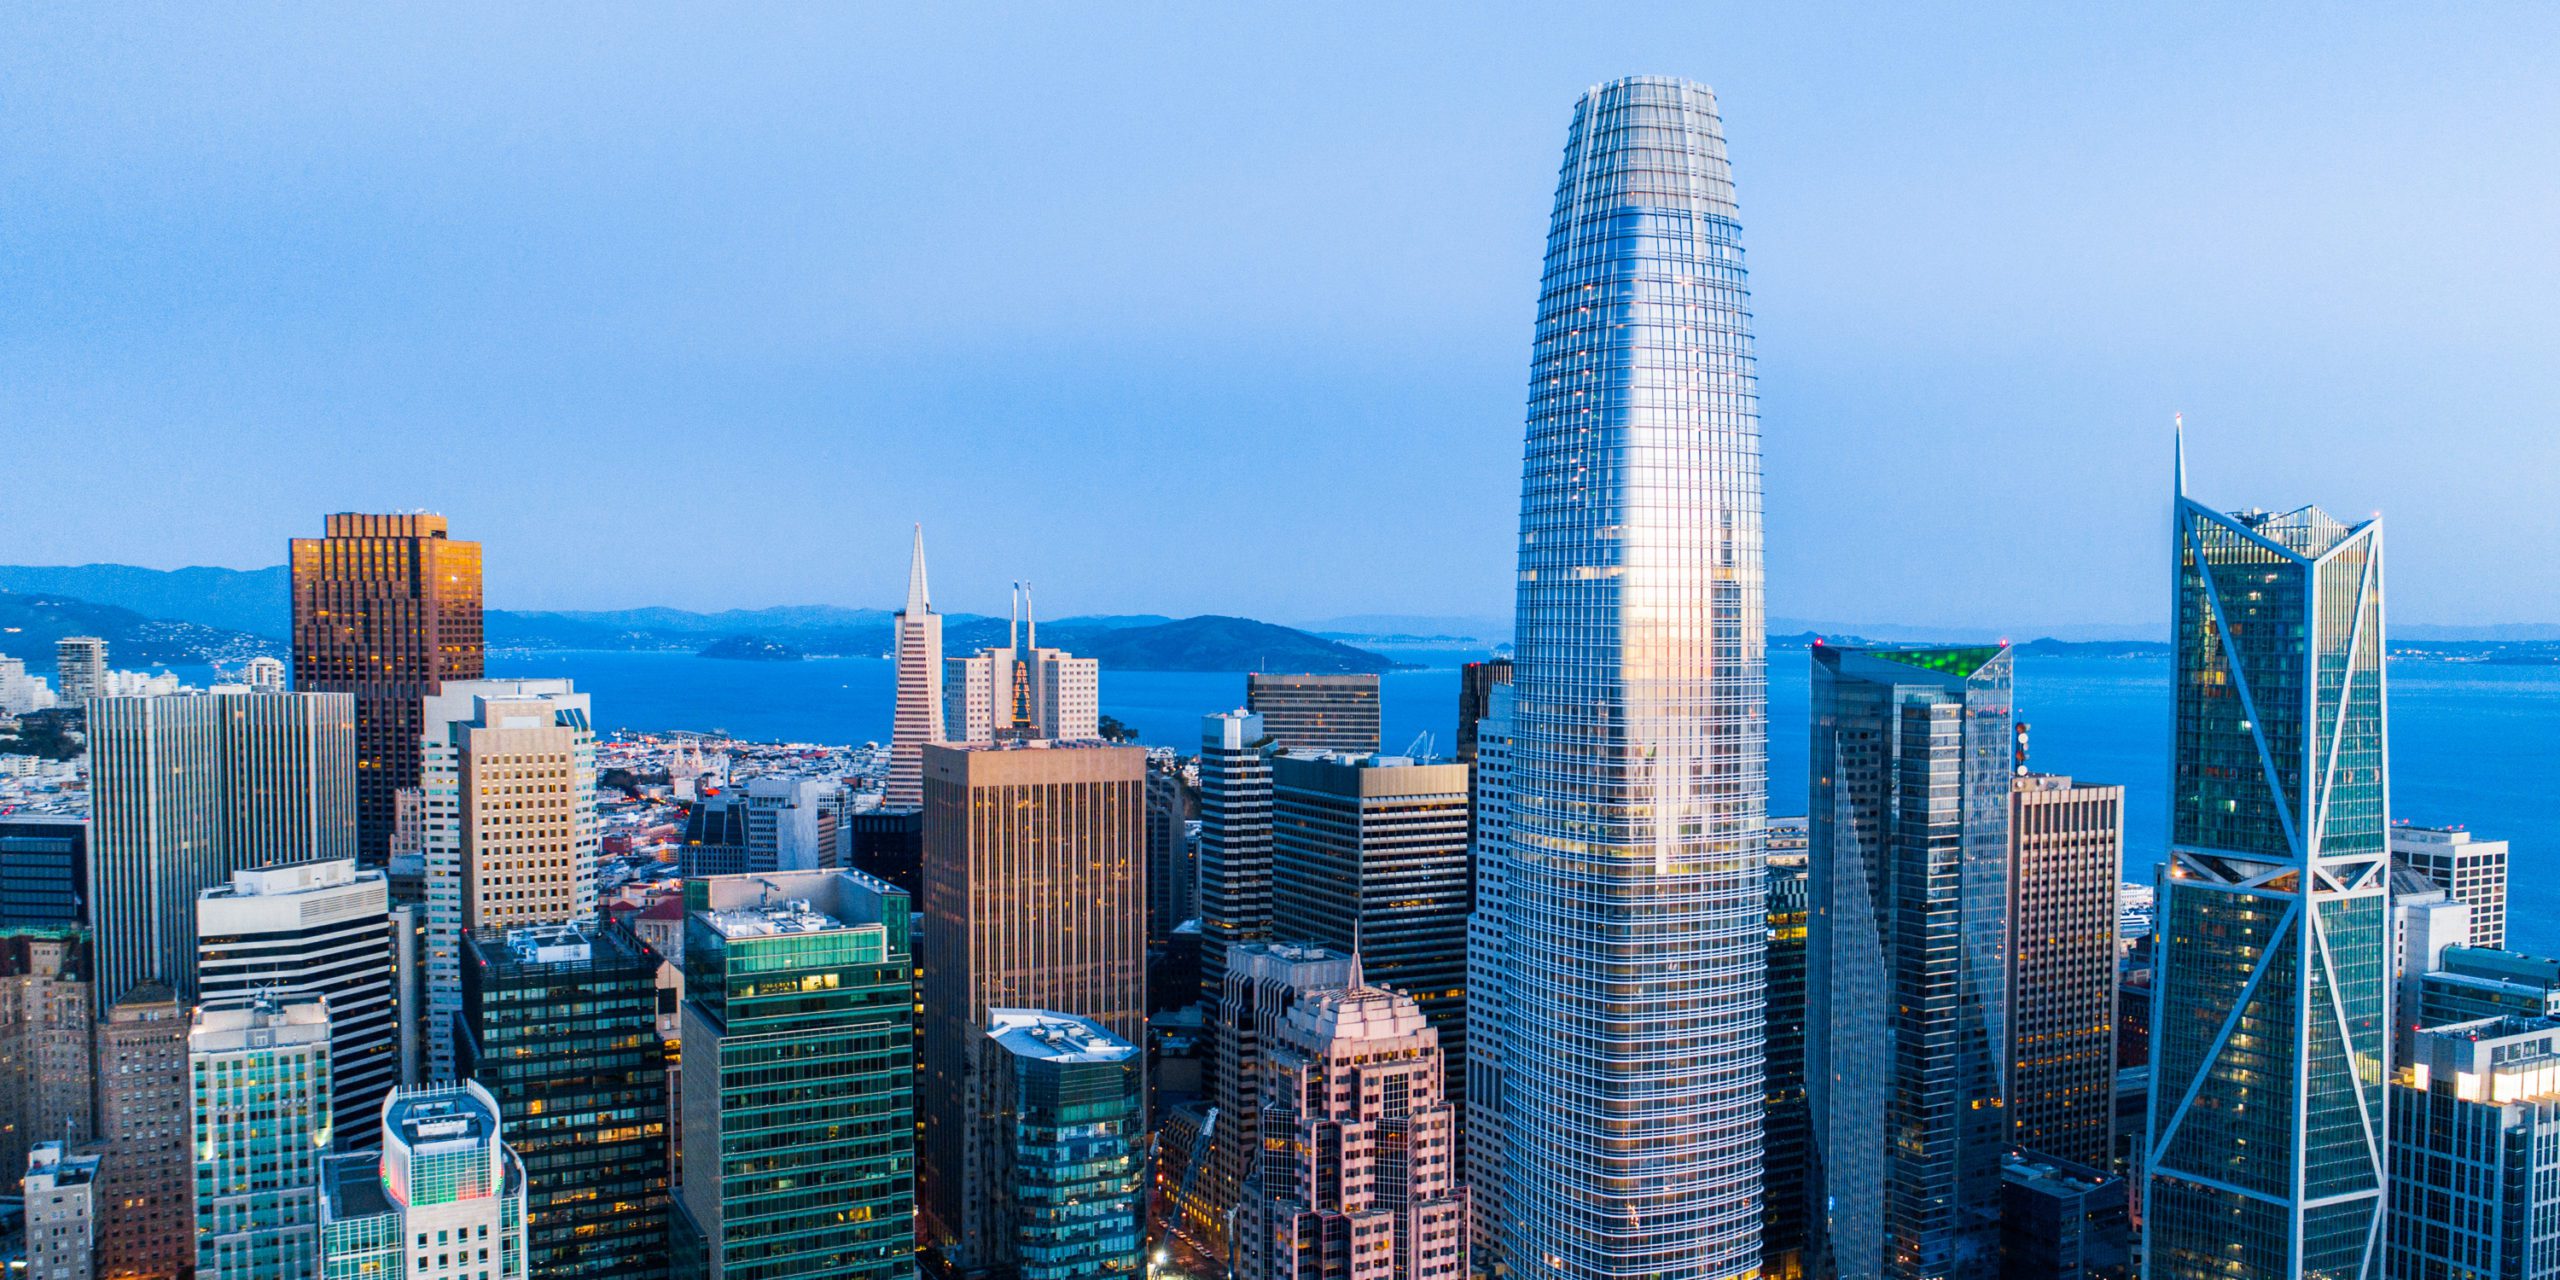 Salesforce Tower overlooking San Francisco in the evening.